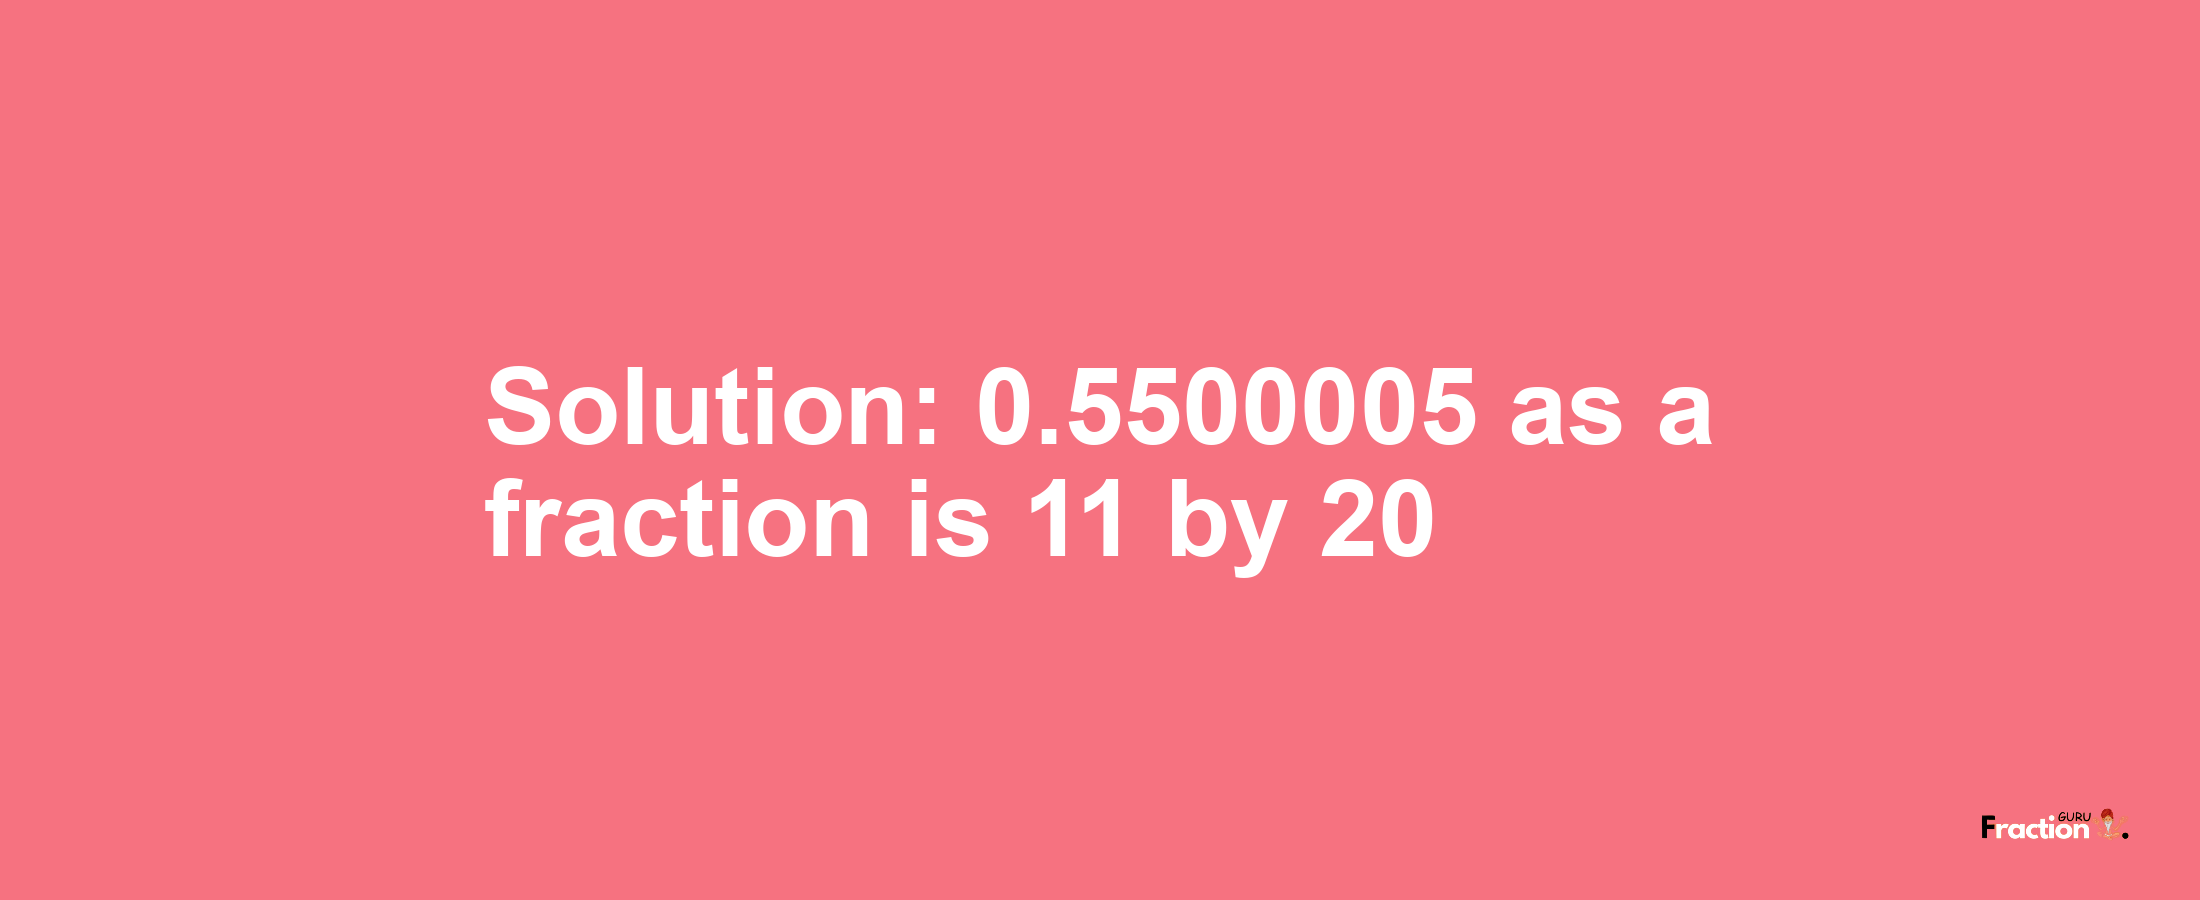 Solution:0.5500005 as a fraction is 11/20